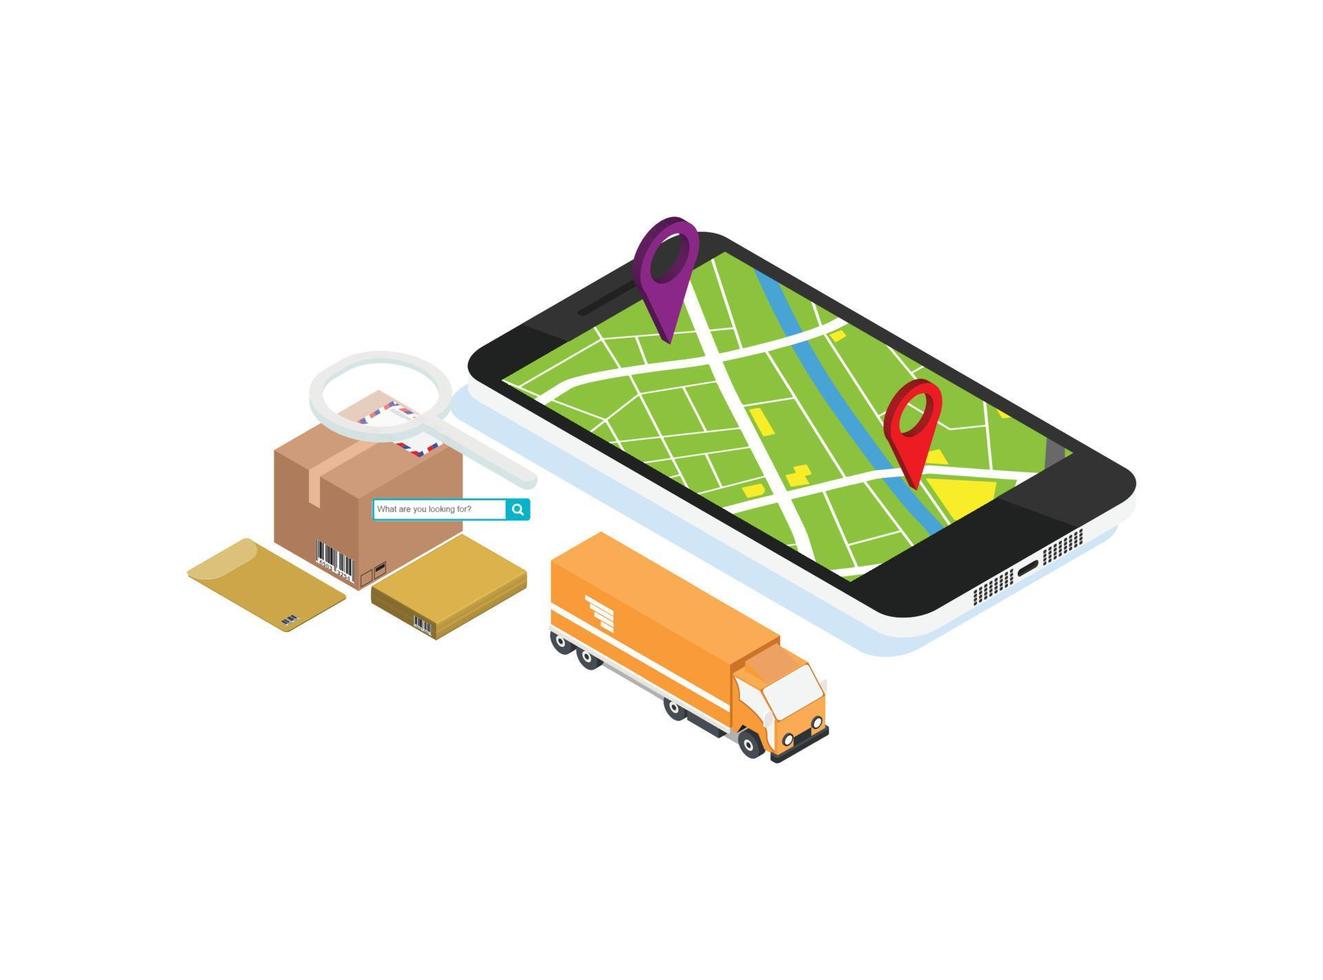 Delivery app isometric illustration. E-commerce. Track service. Truck shipping. Global online navigation. Delivery tracking infographic. Smartphone app, web, banner design. Isolated vector